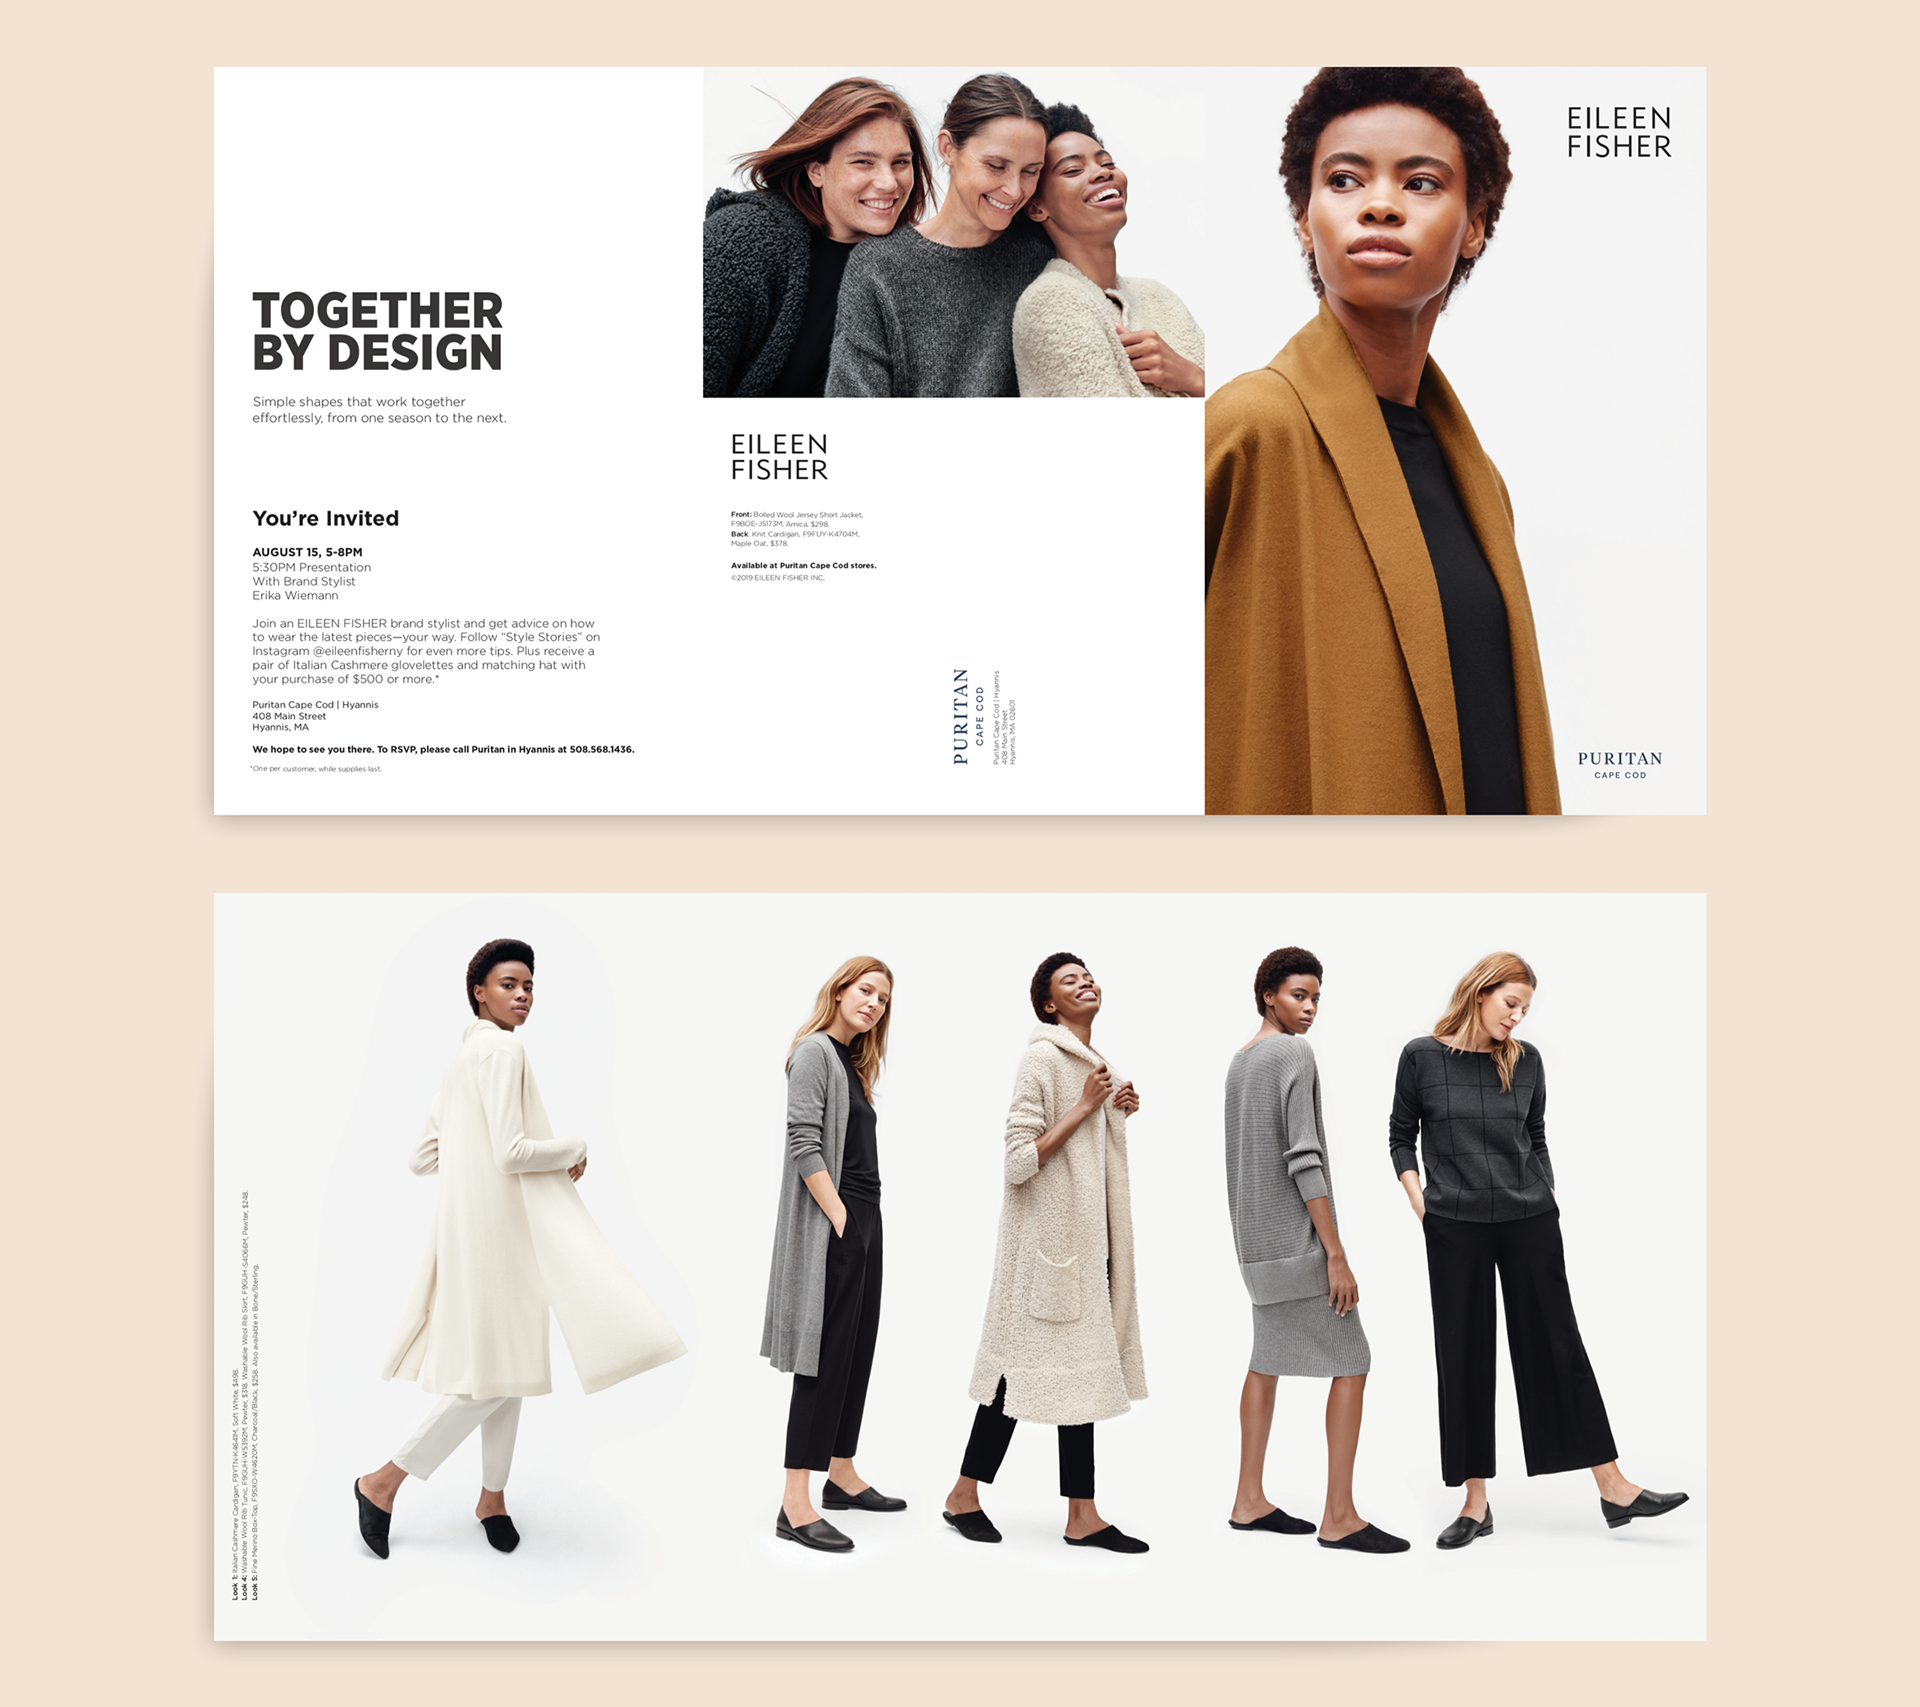 The Biggest Thing We Can Do is Reduce”—Eileen Fisher Shares a